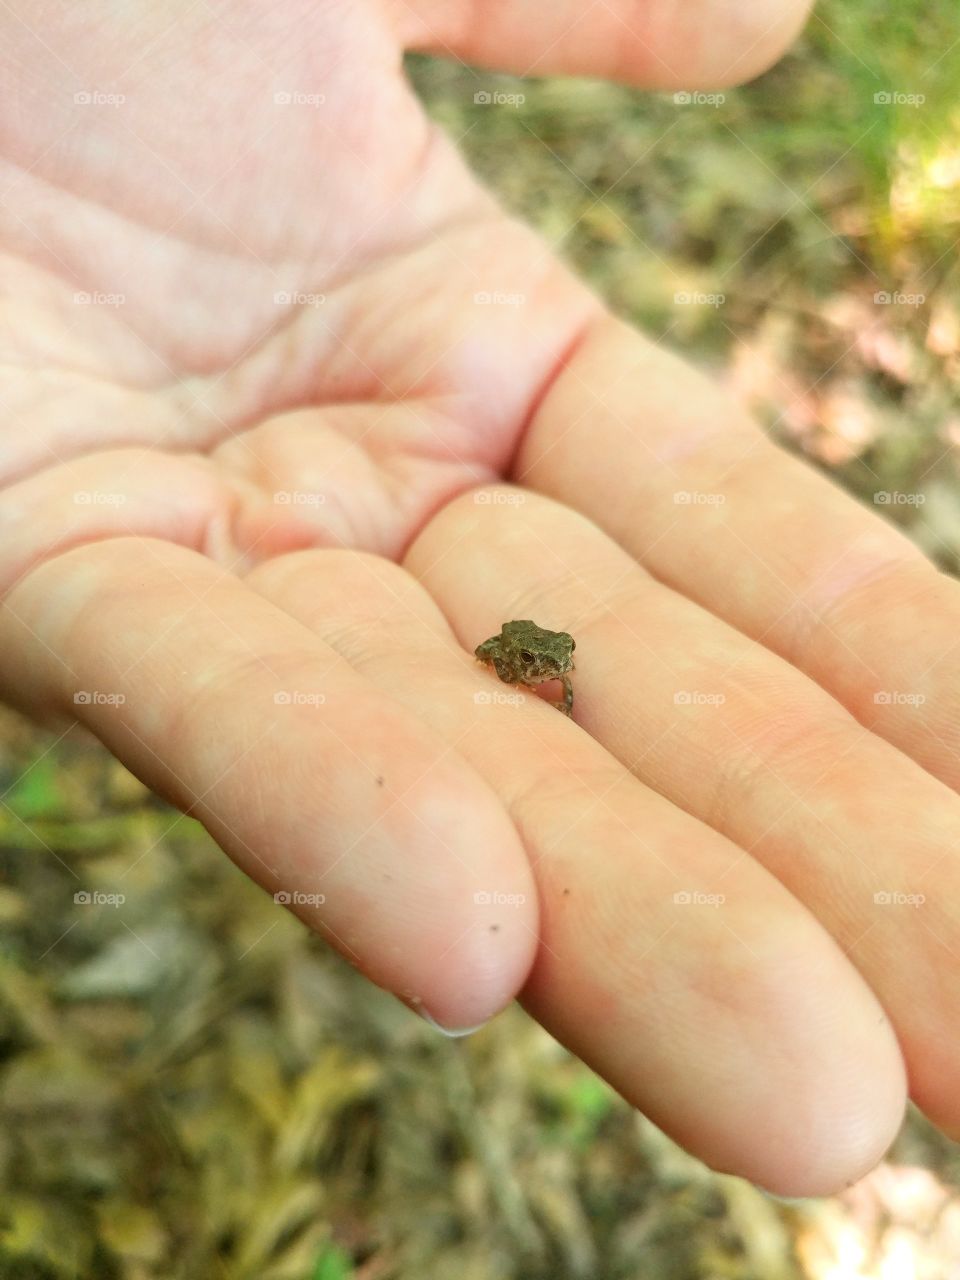 A tiny frog that just emerges from the water after fully forming. After picking hi up he hangs out with me for a little while for a photo shoot.